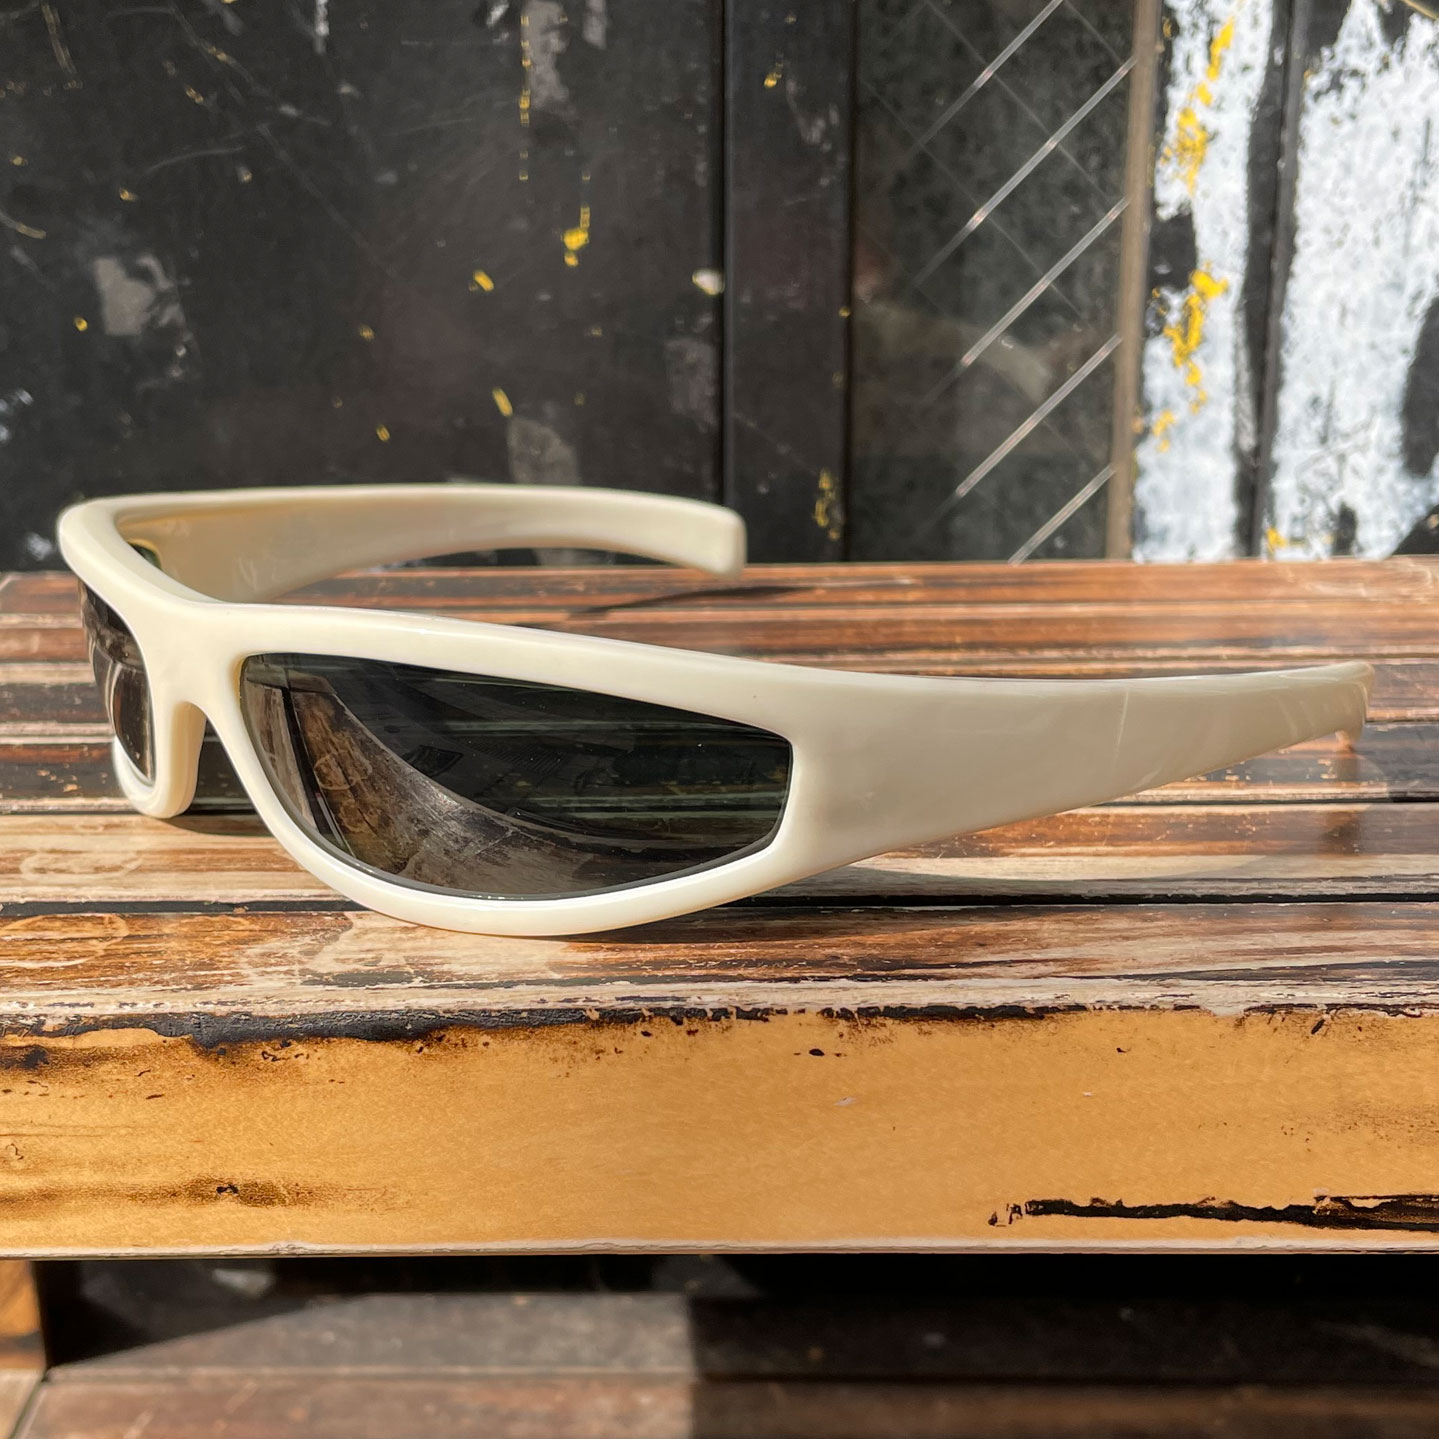 ITALY MADE VINTAGE SUNGLASS CATS EYE WHITE